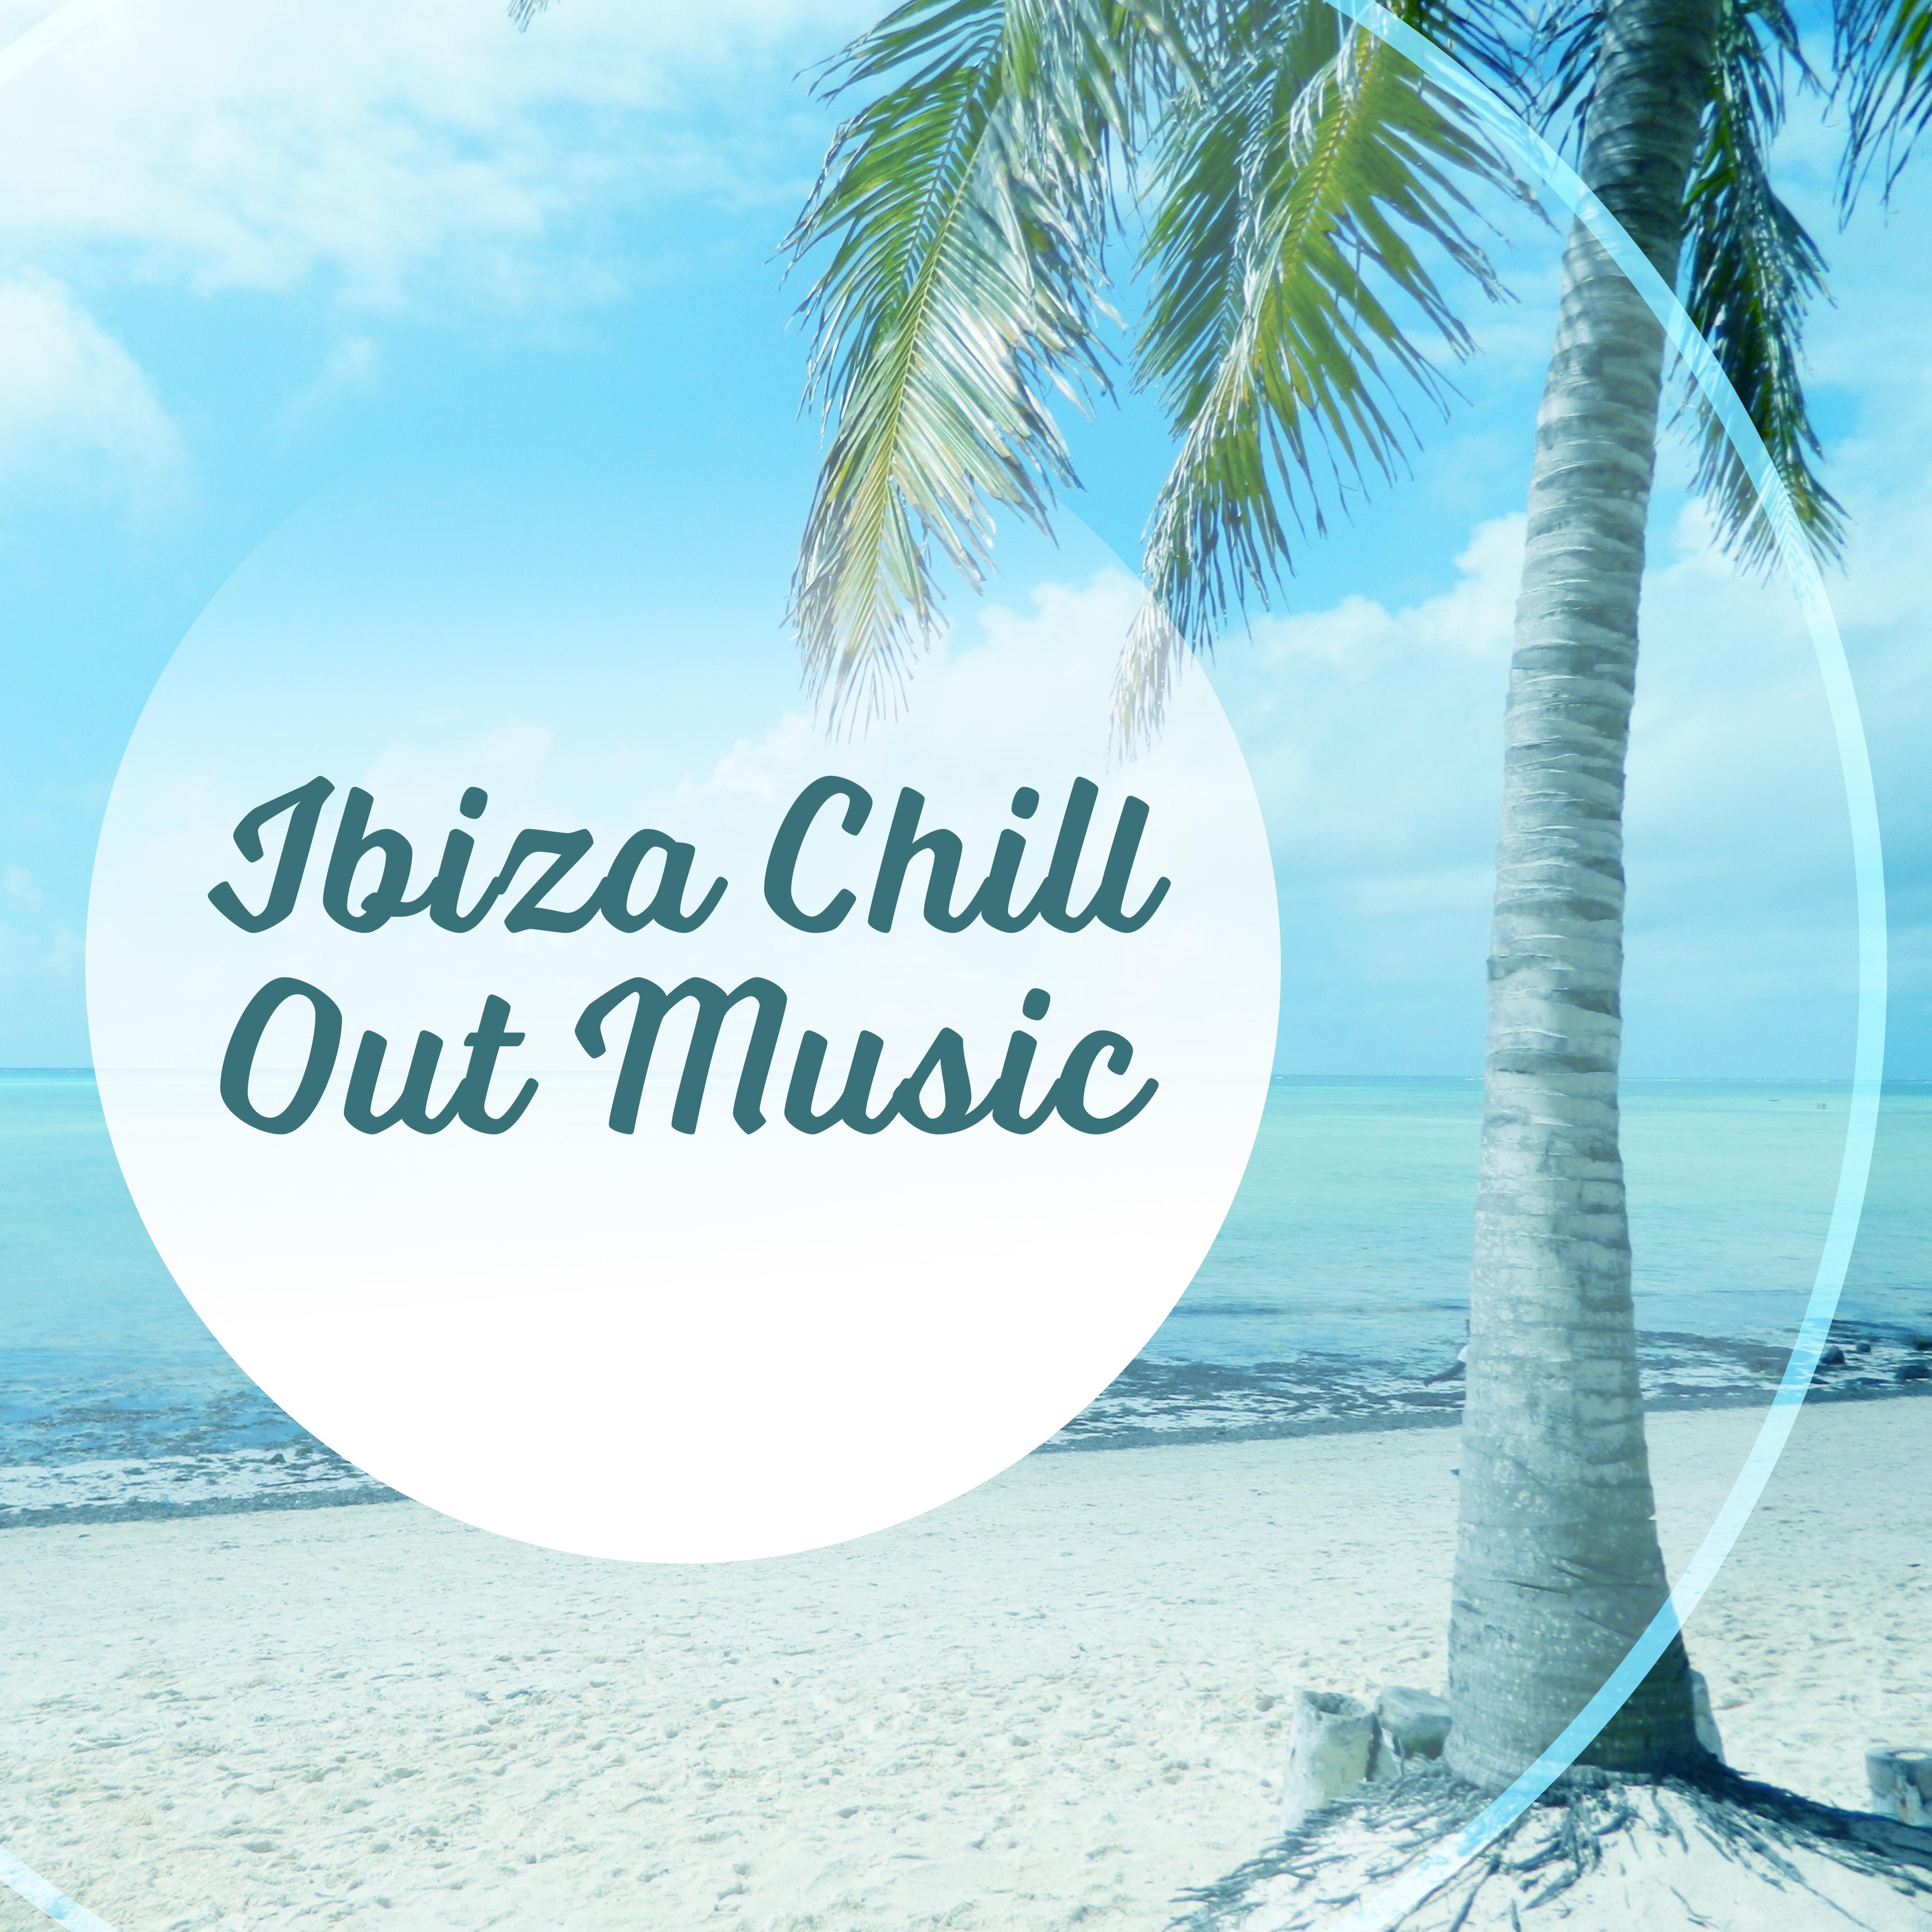 Ibiza Chill Out Music  Calm Music, Ibiza Relaxation, Stress Relief, Chill a Bit